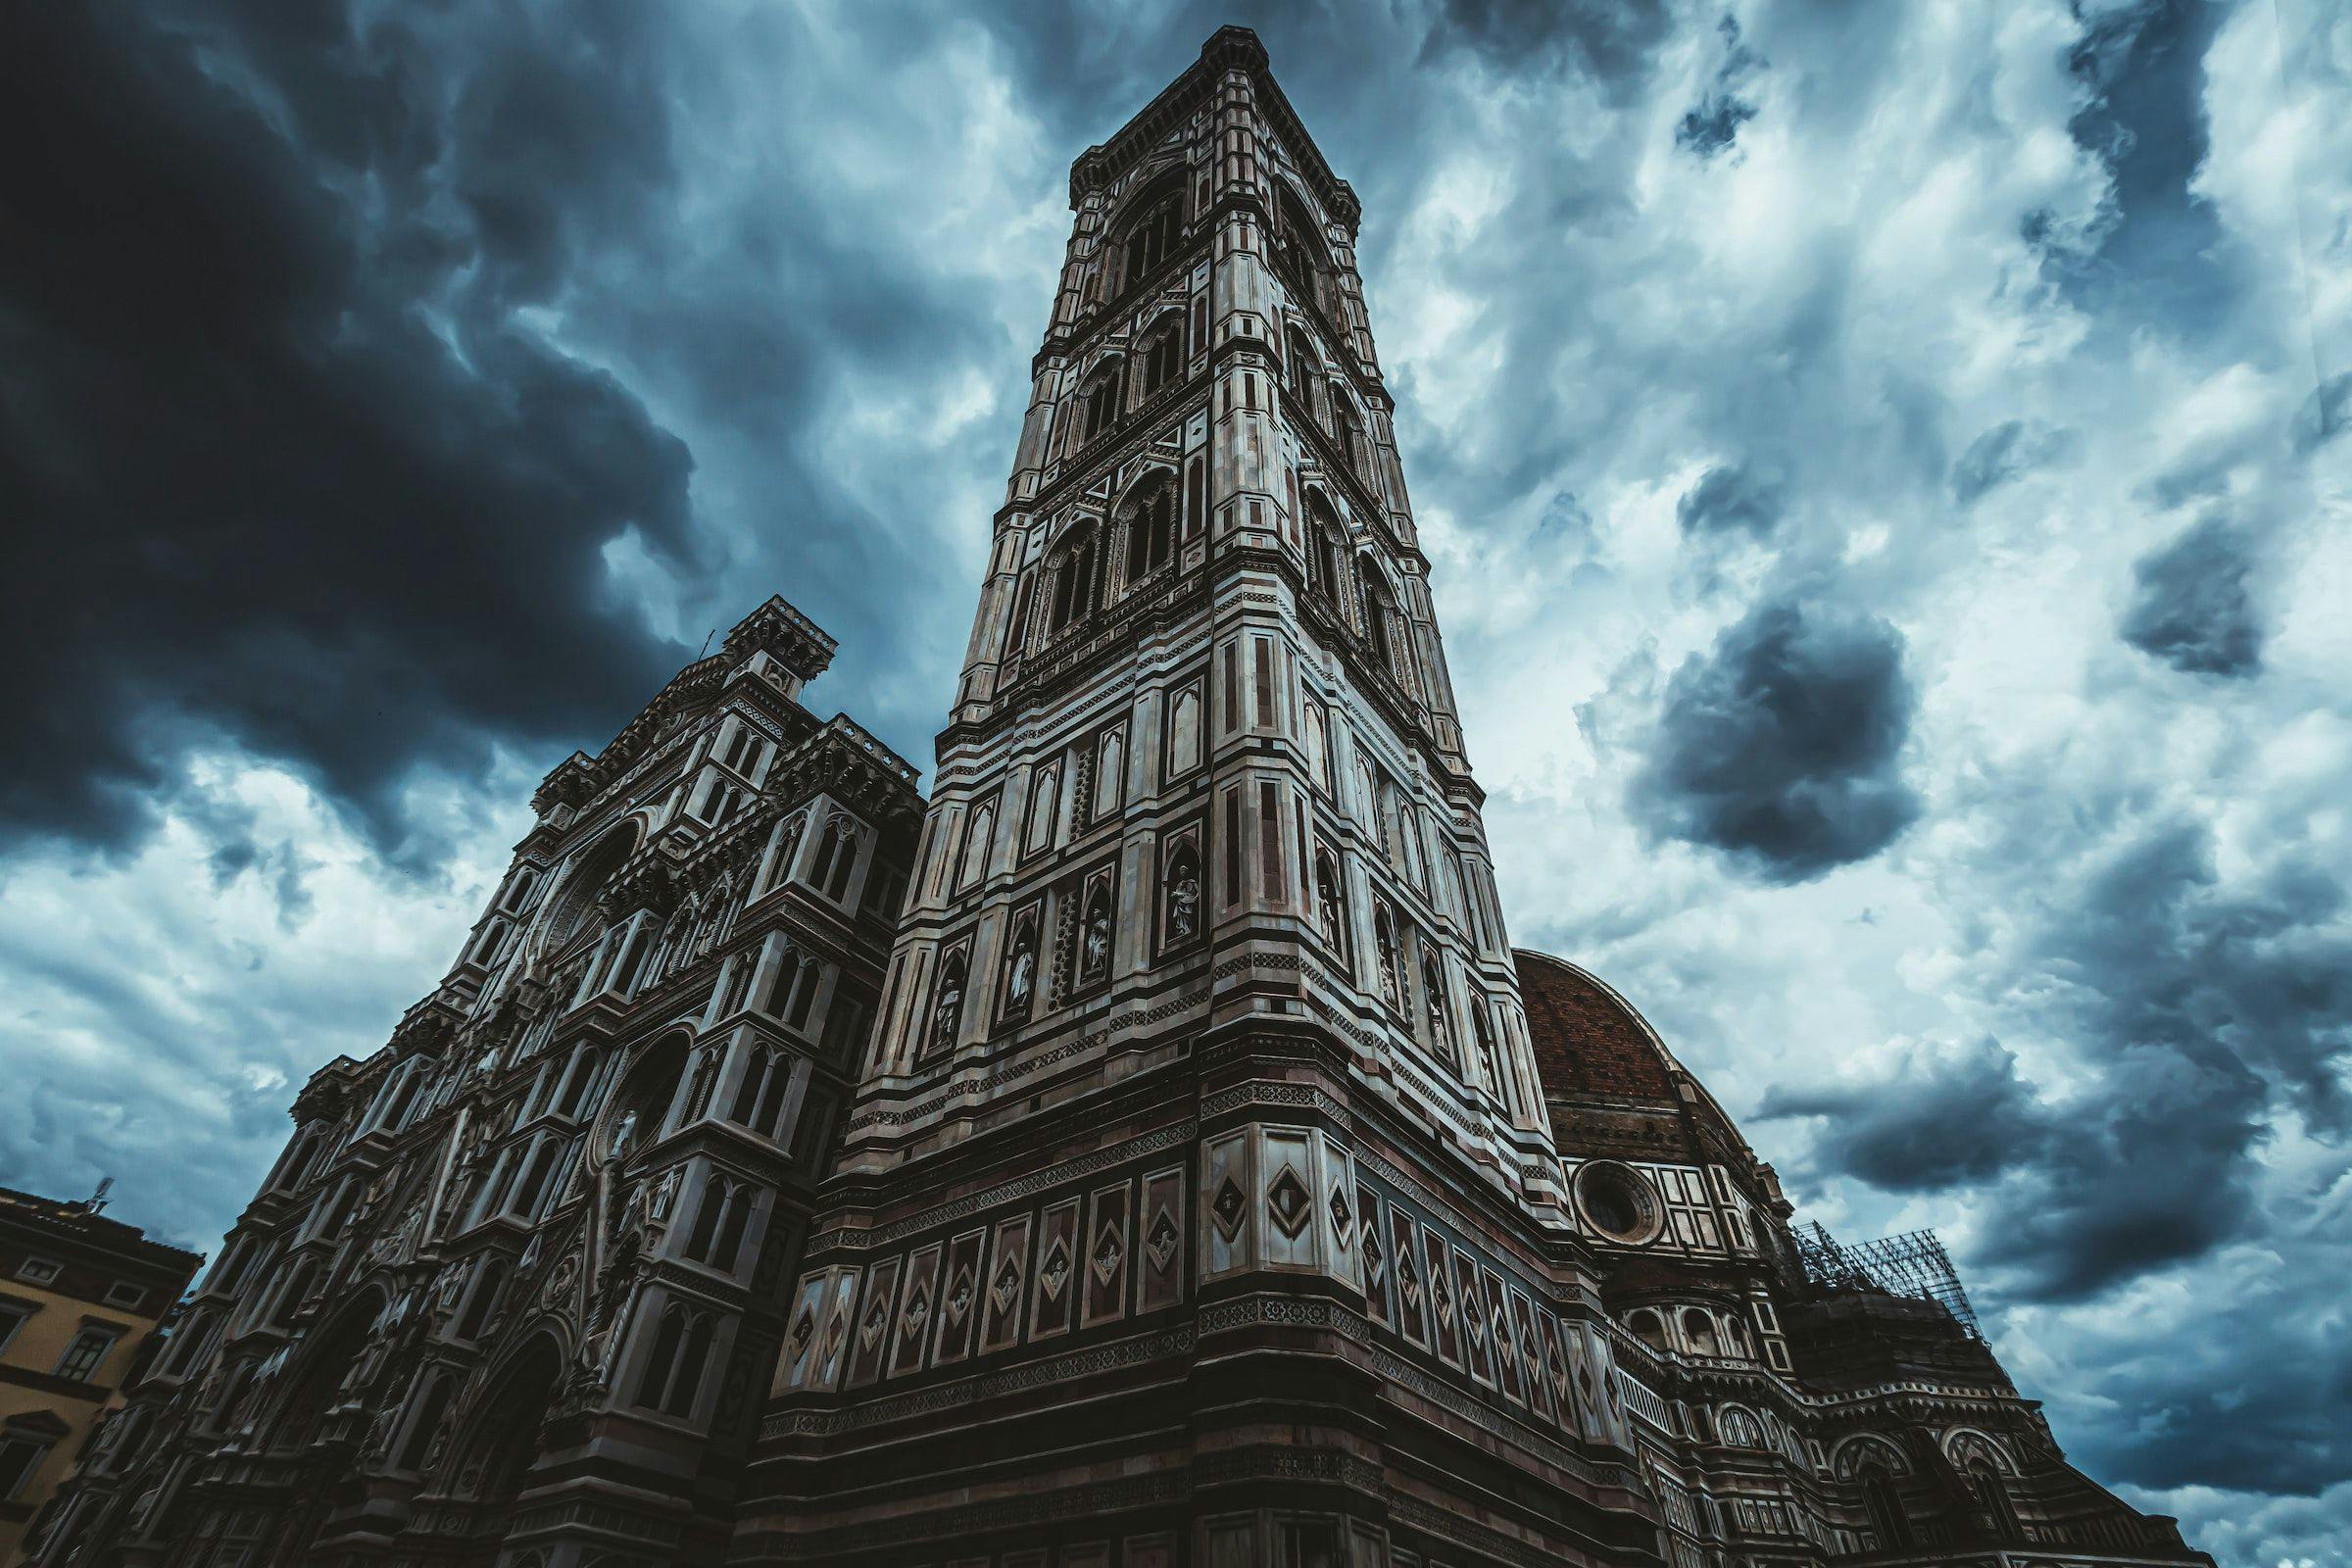 The medieval tower houses of Florence